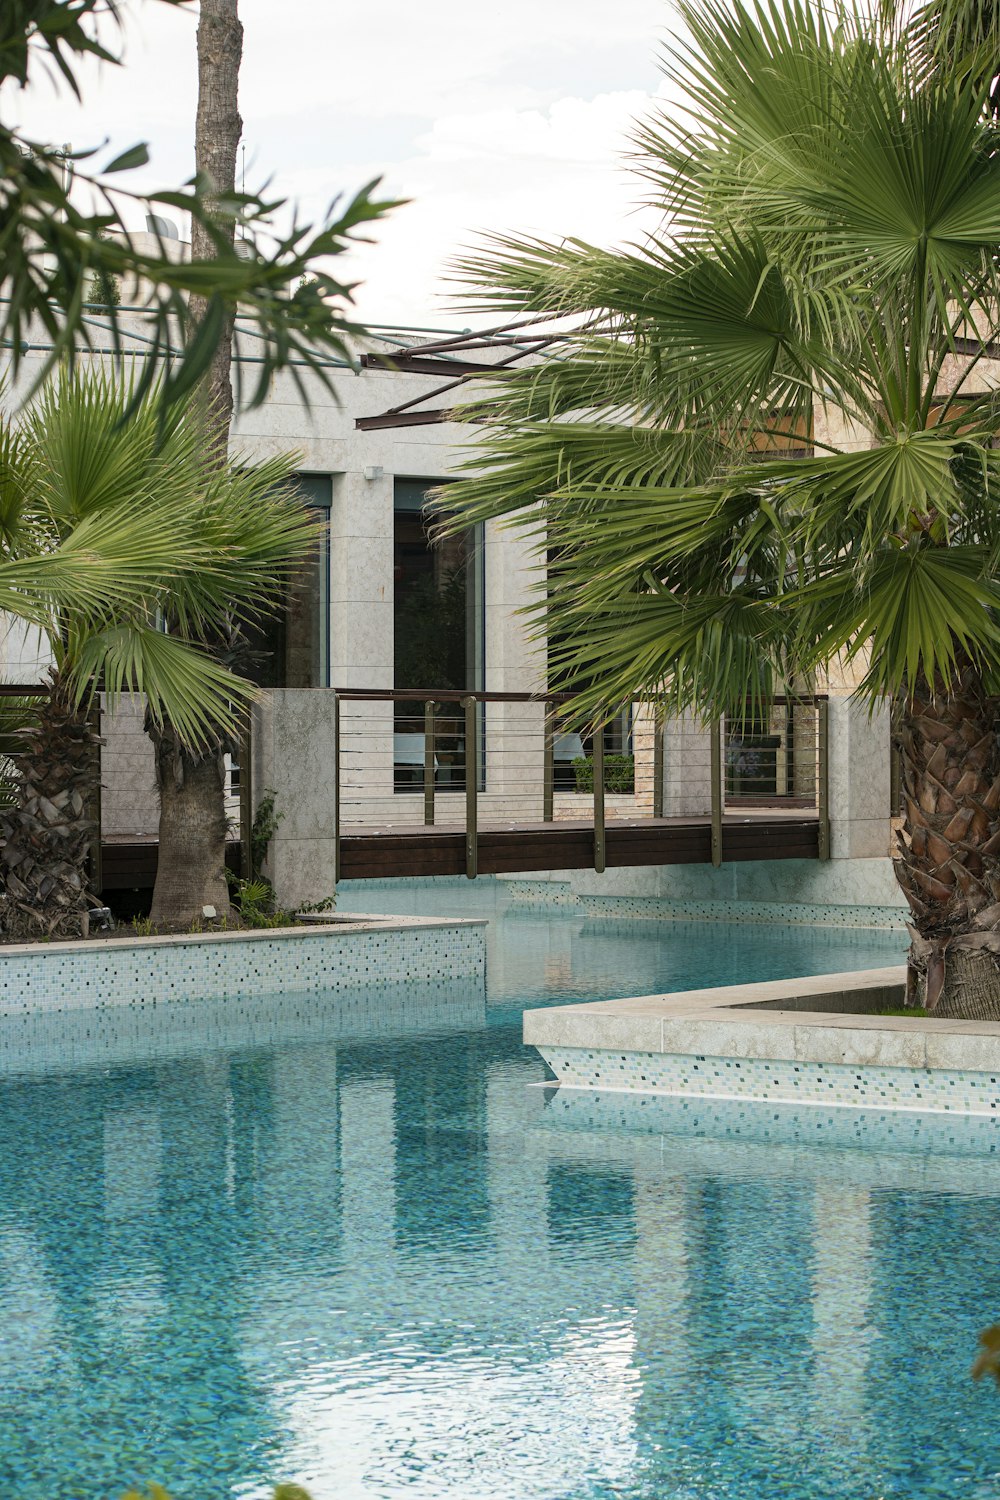 swimming pool near palm trees and building